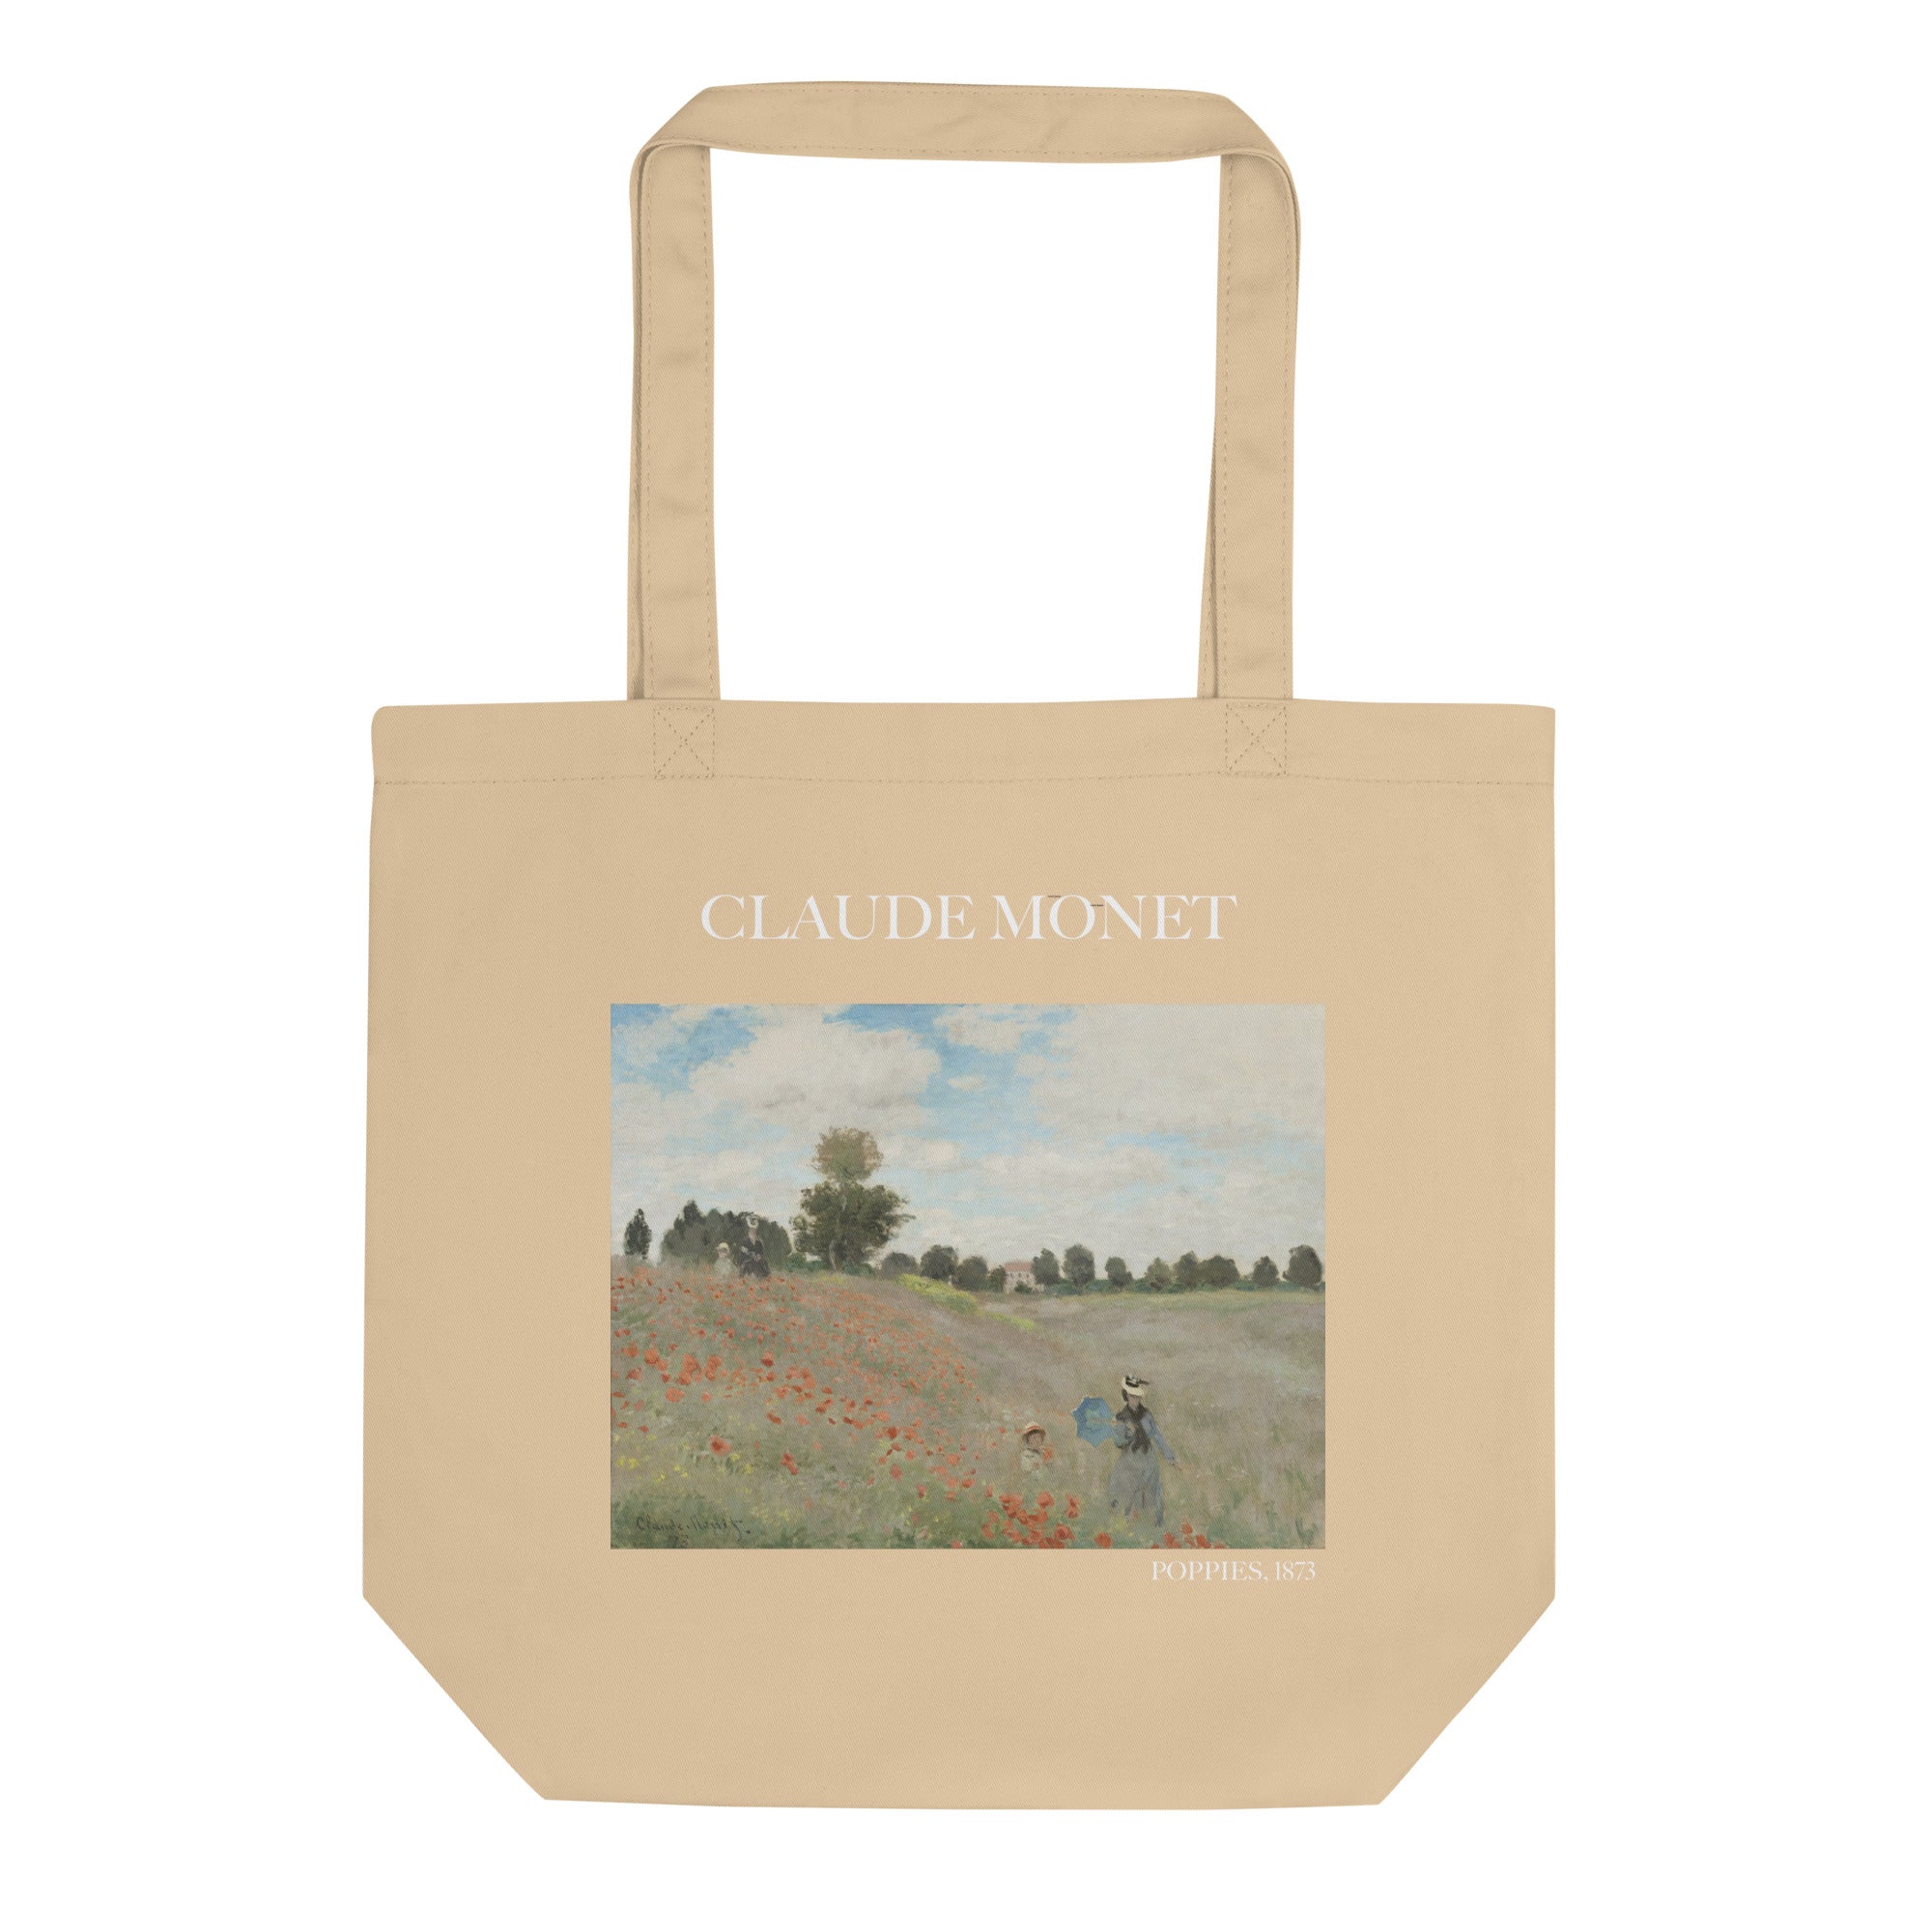 Claude Monet 'Poppies' Famous Painting Totebag | Eco Friendly Art Tote Bag